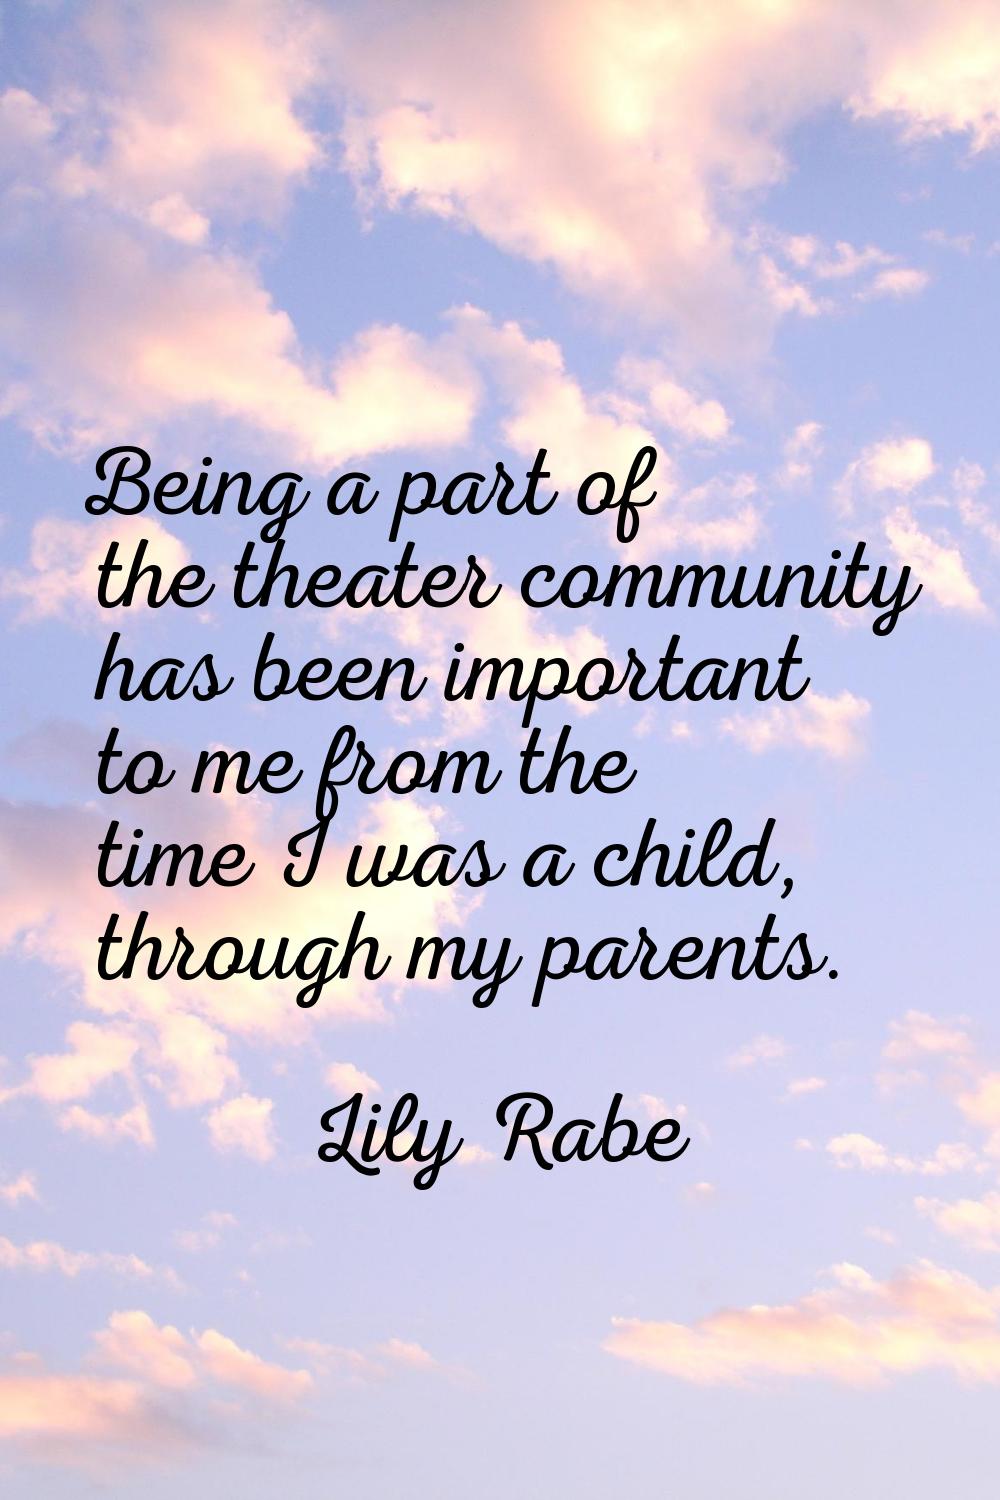 Being a part of the theater community has been important to me from the time I was a child, through